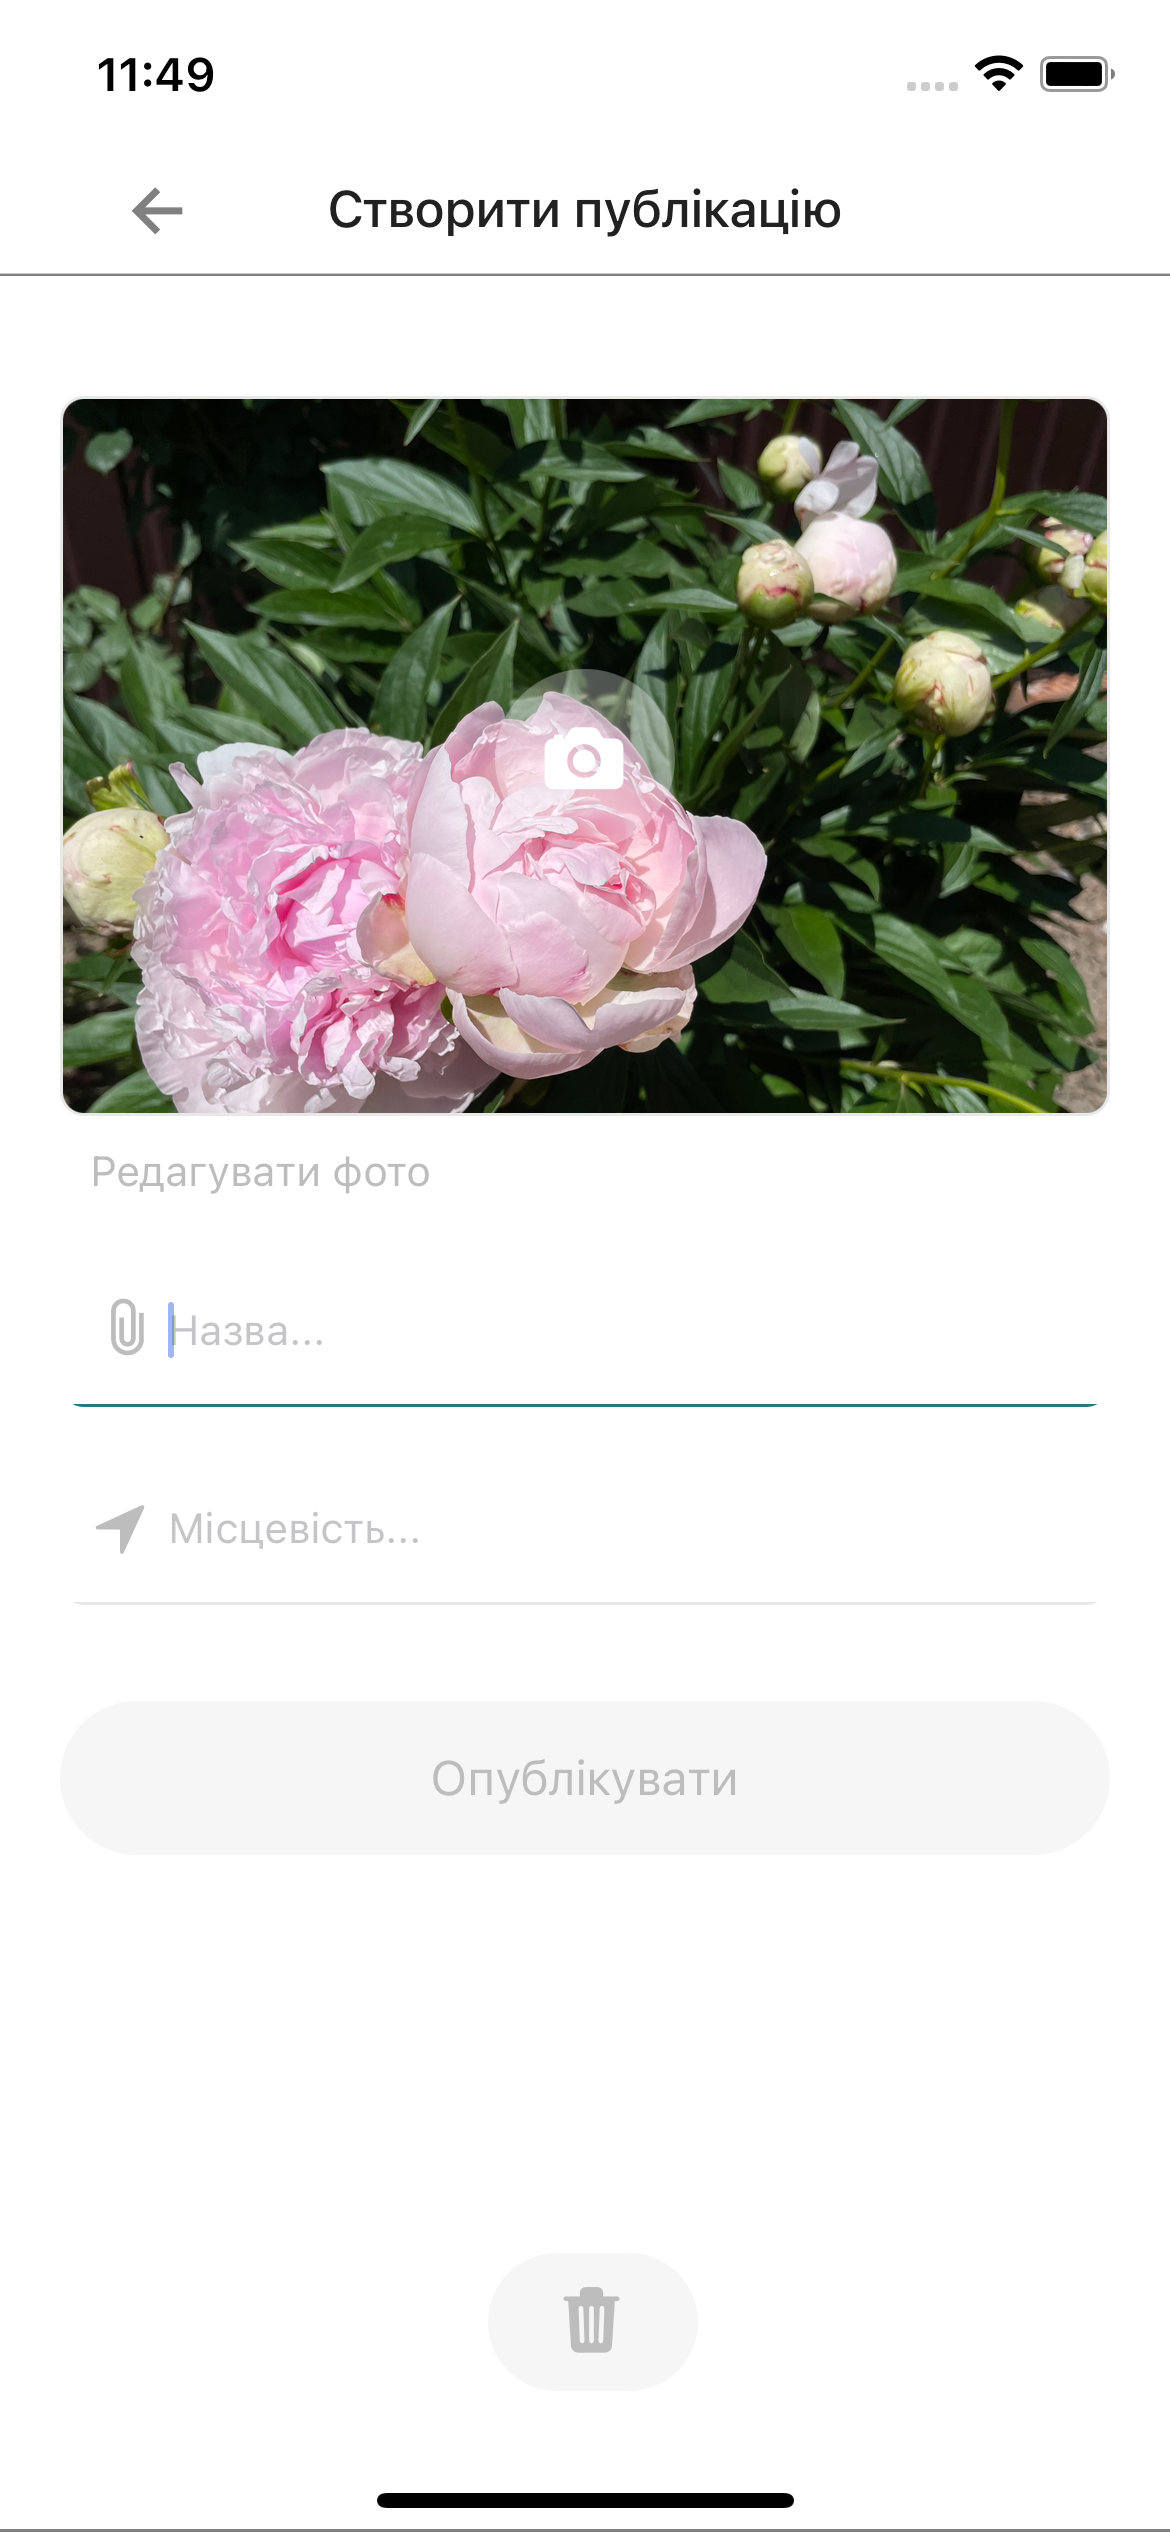 Add photo in 'creation of post' screen